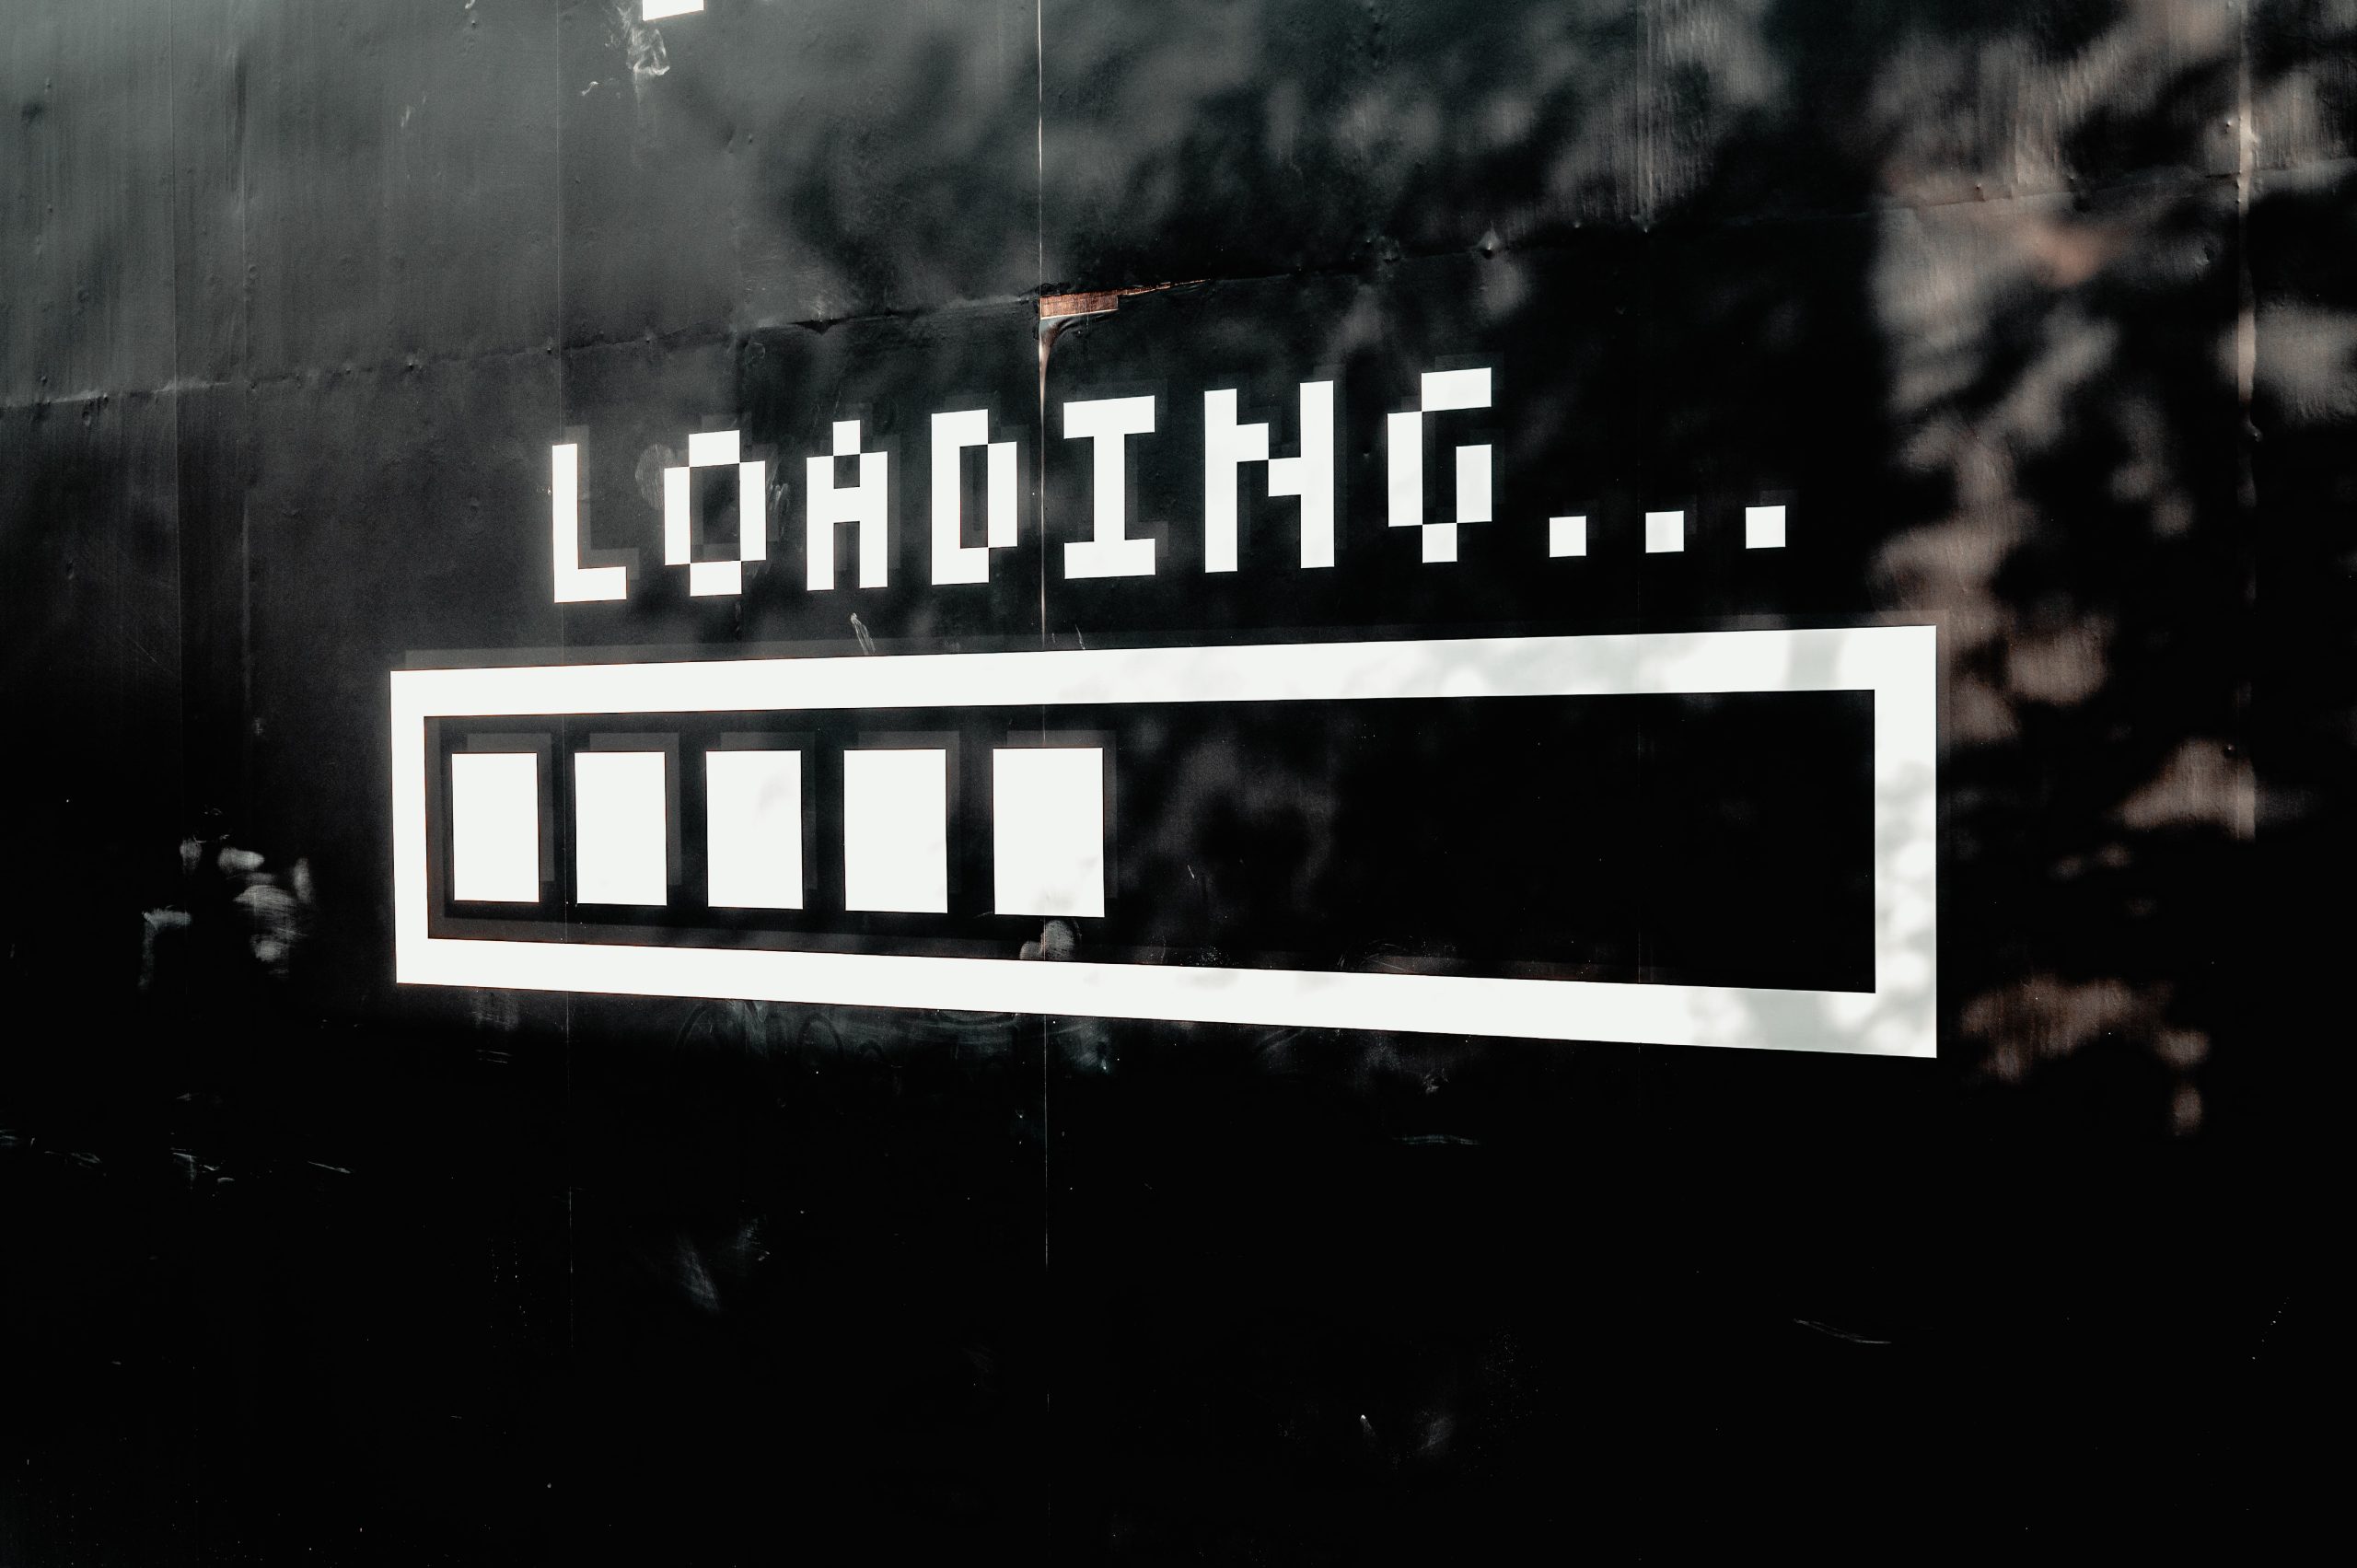 Website loading speed is paramount for e-commerce businesses